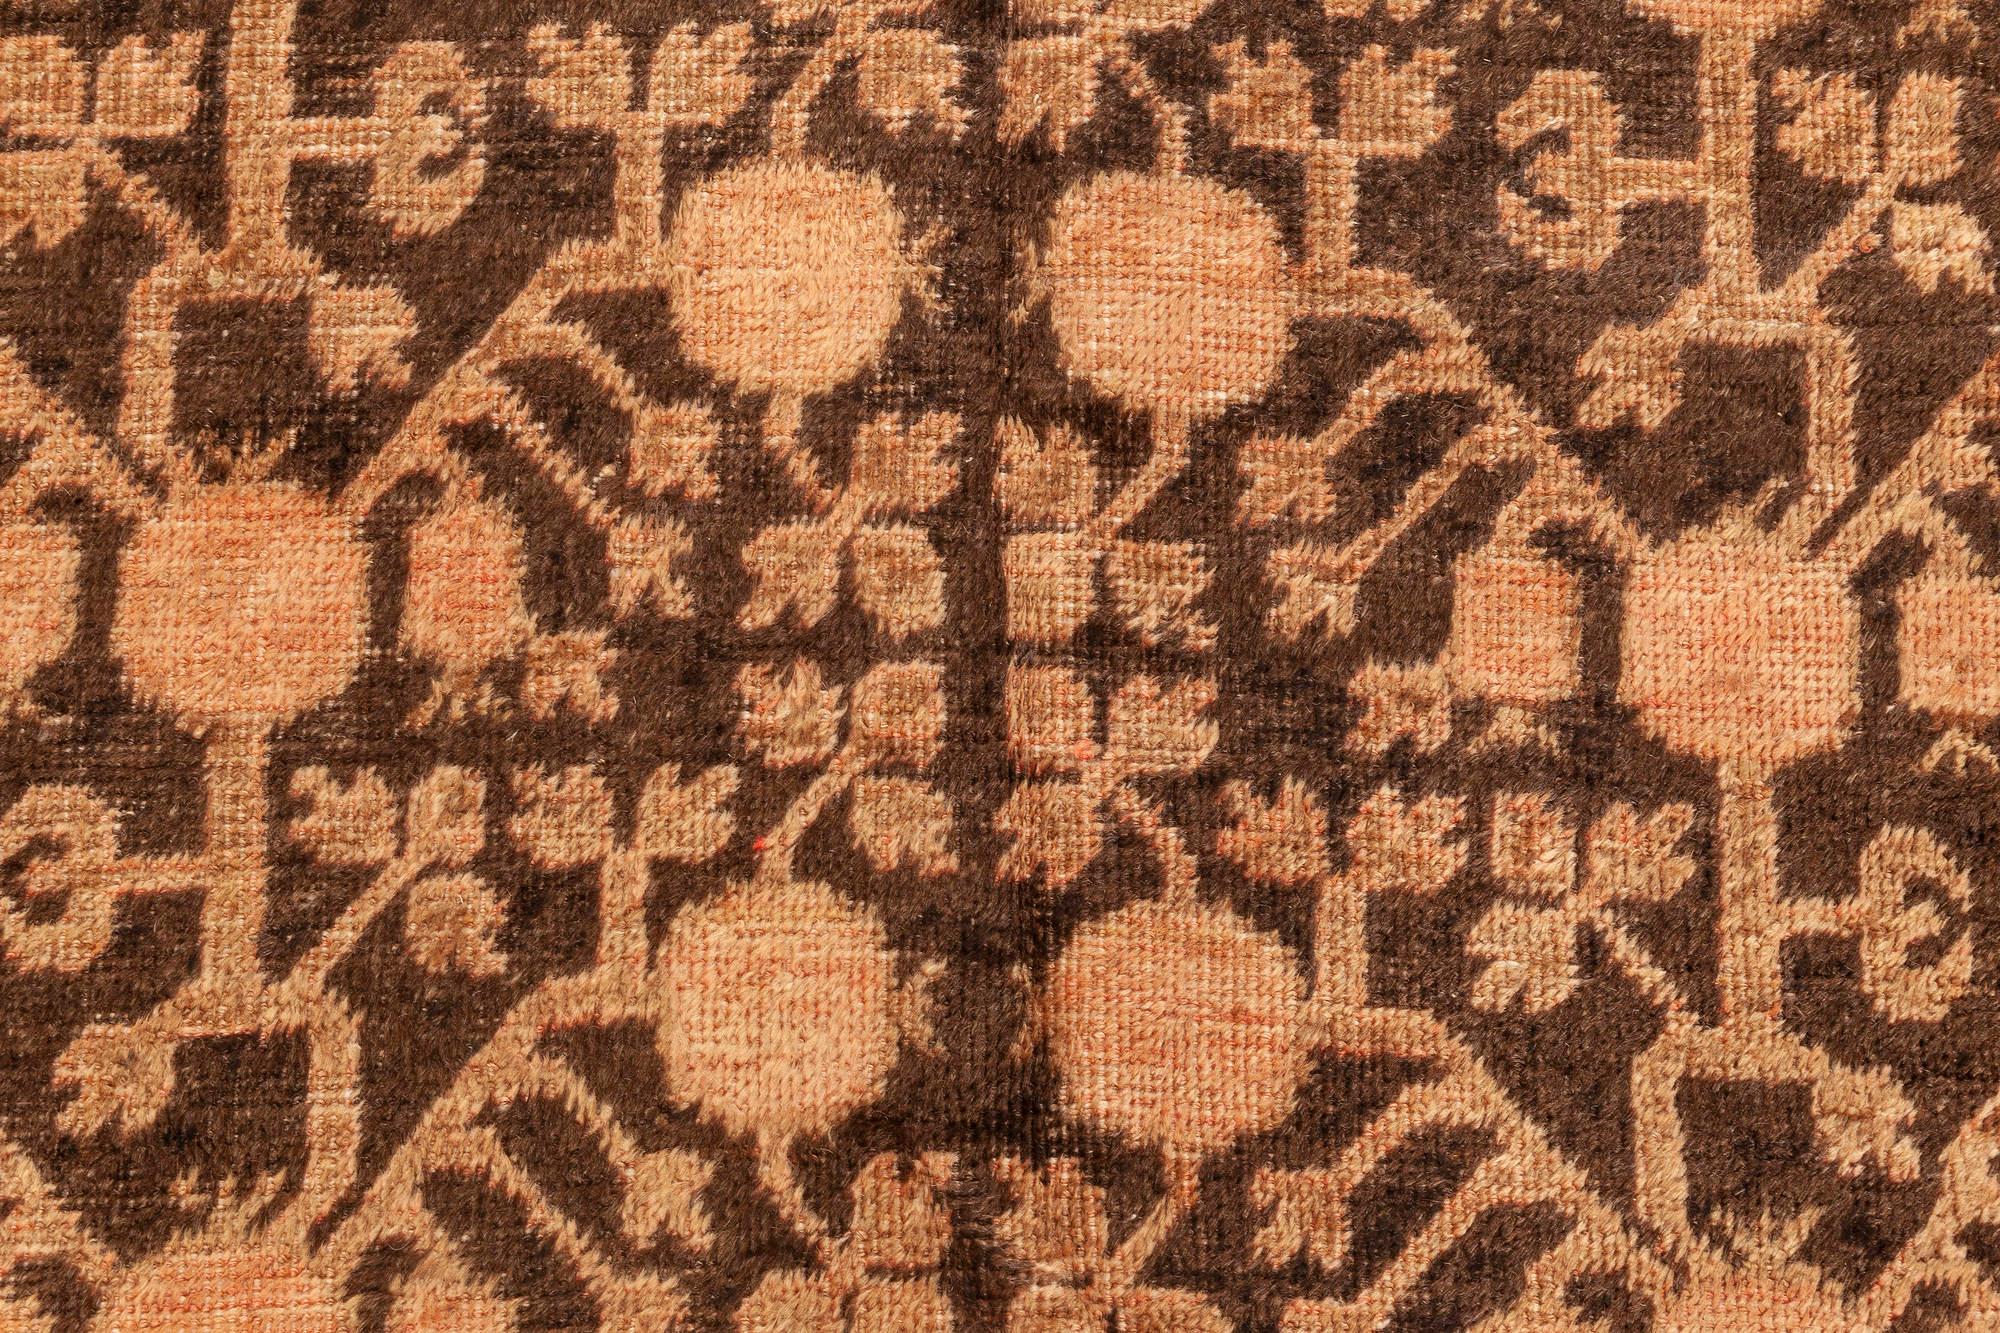 Samarkand midcentury brown and beige wool rug
Size: 6'2